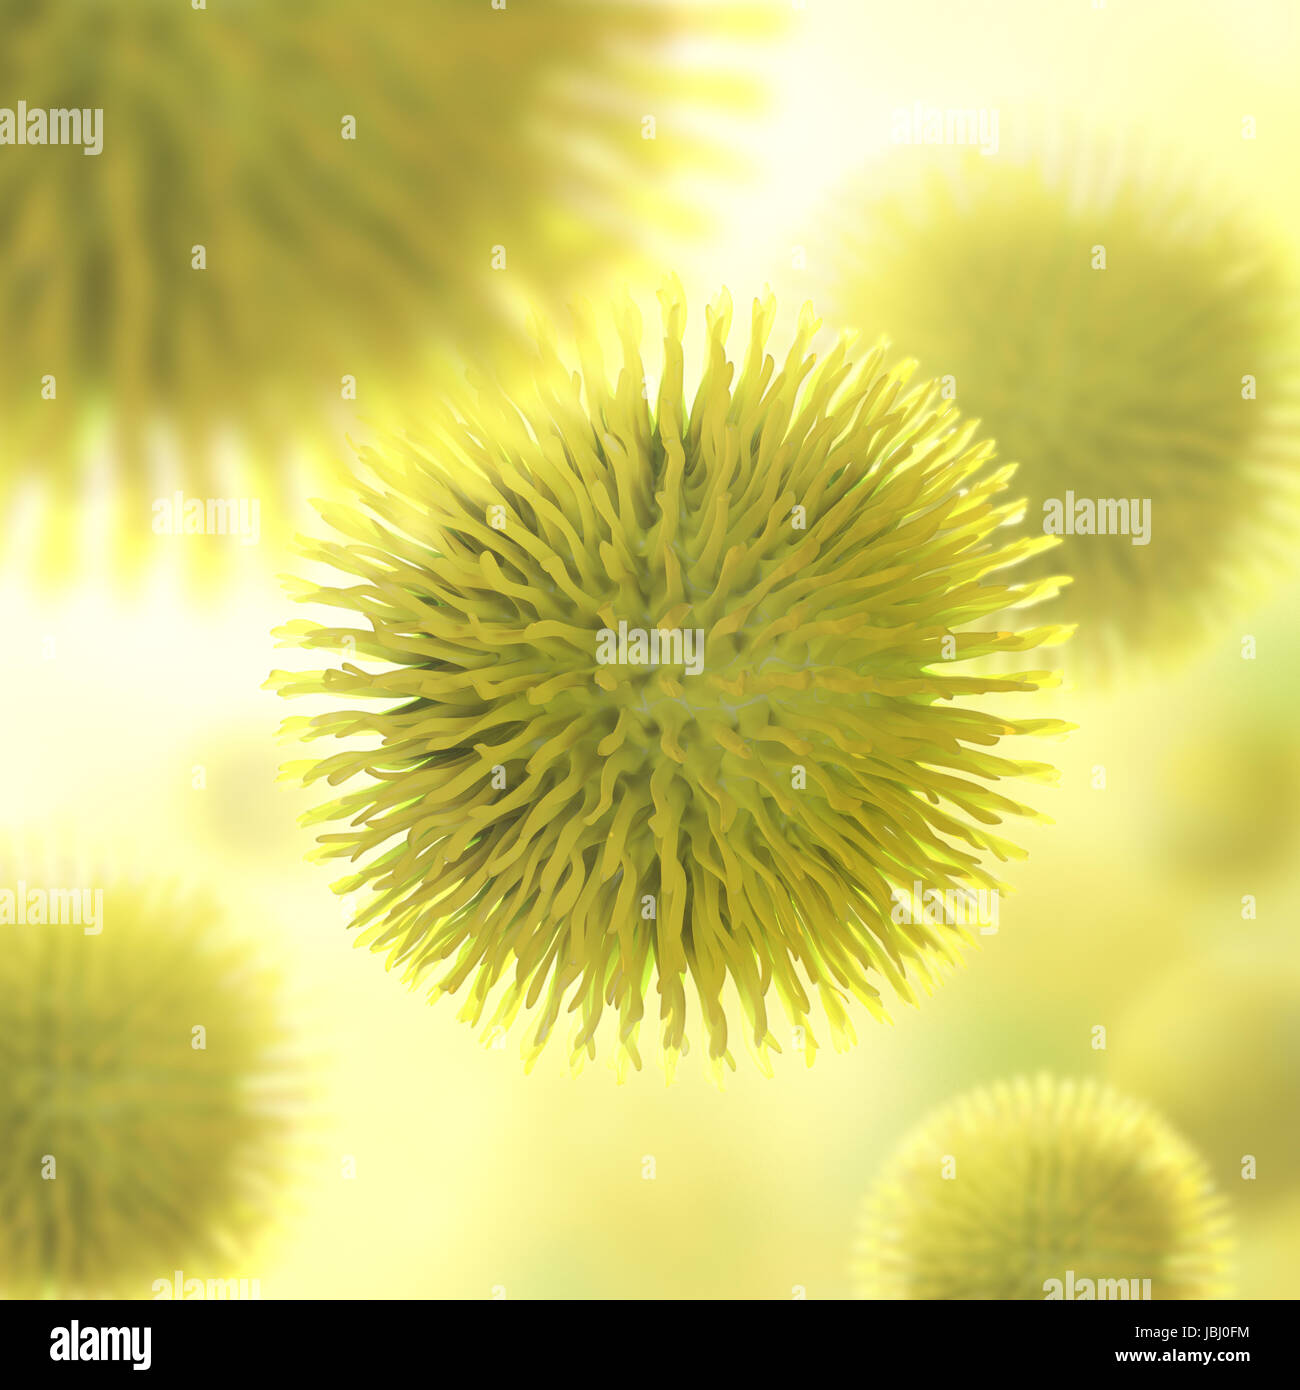 Infectious virus closely. Concept of disease transmission and epidemic. Stock Photo